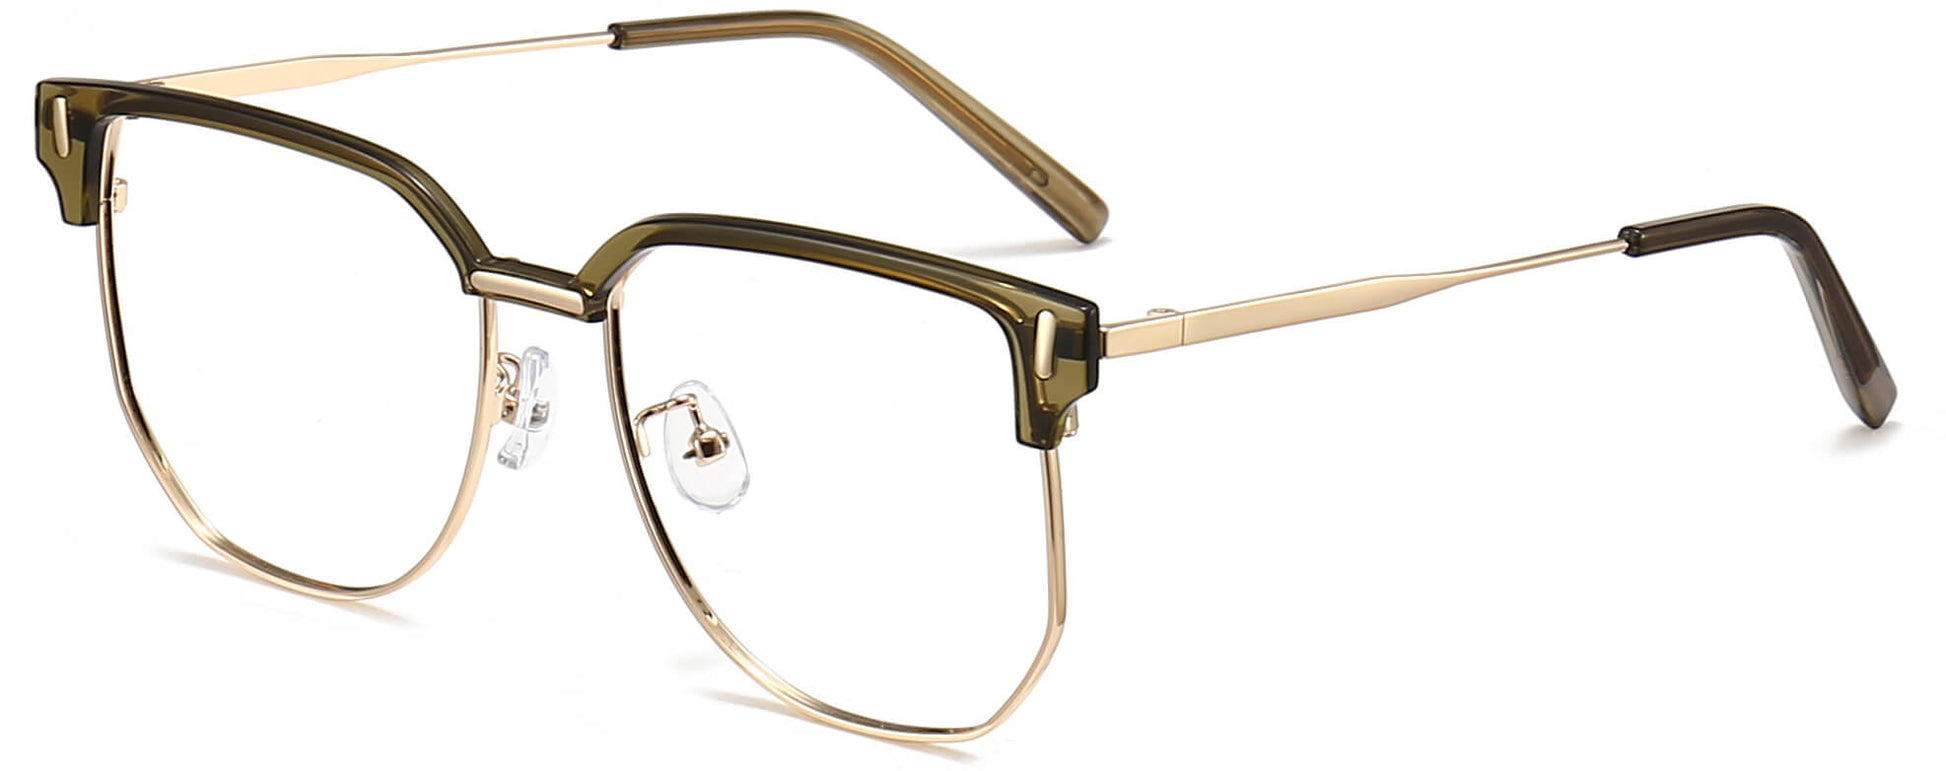 Rex Browline Green Eyeglasses from ANRRI, angle view